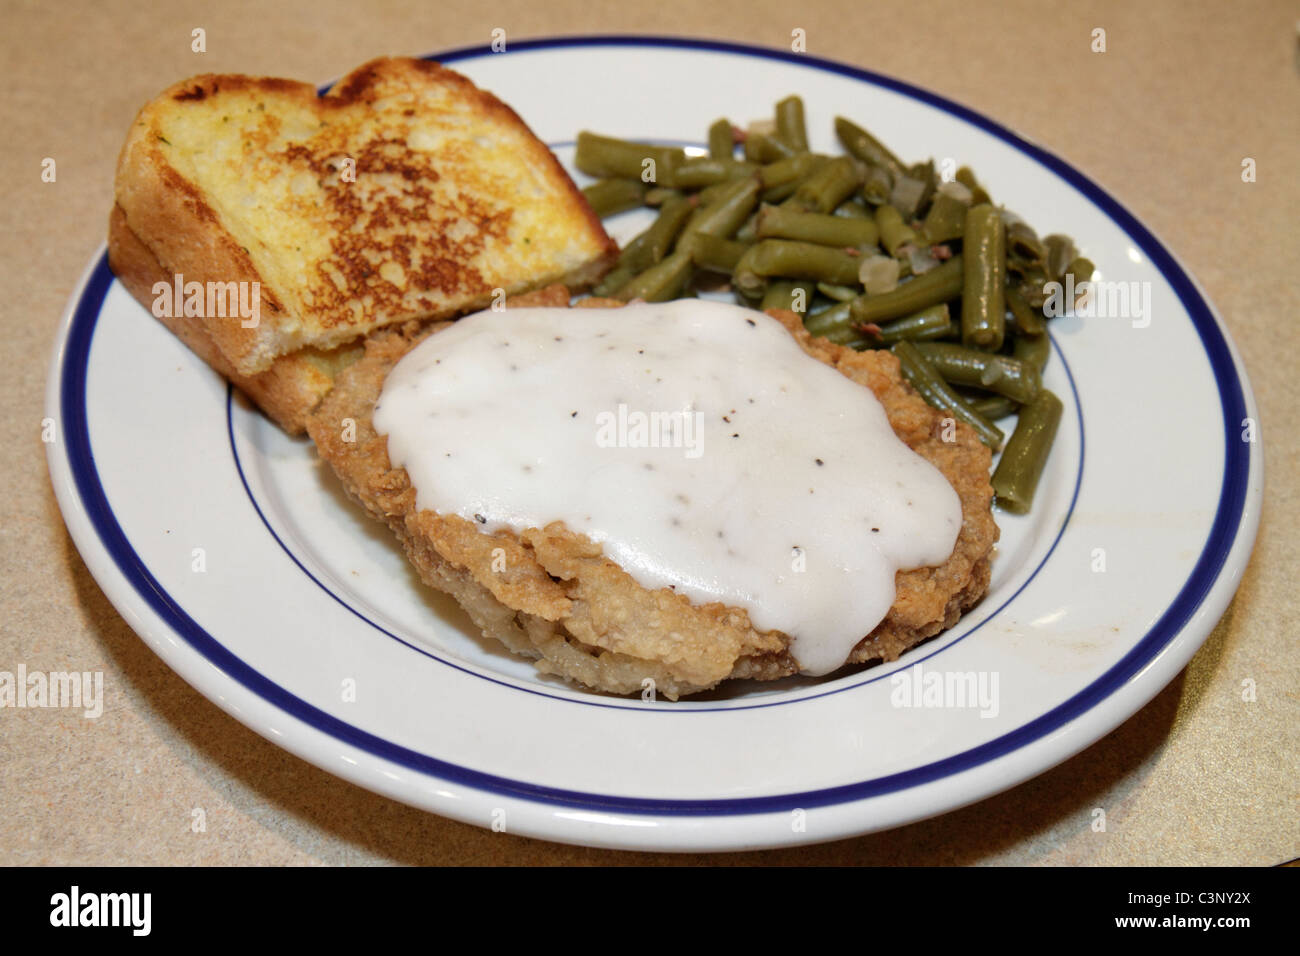 Tampa Florida,Temple Terrace,Bob Evans,restaurant restaurants food dining eating out cafe cafes bistro,country fried,toast,green beans,food,plate,dish Stock Photo